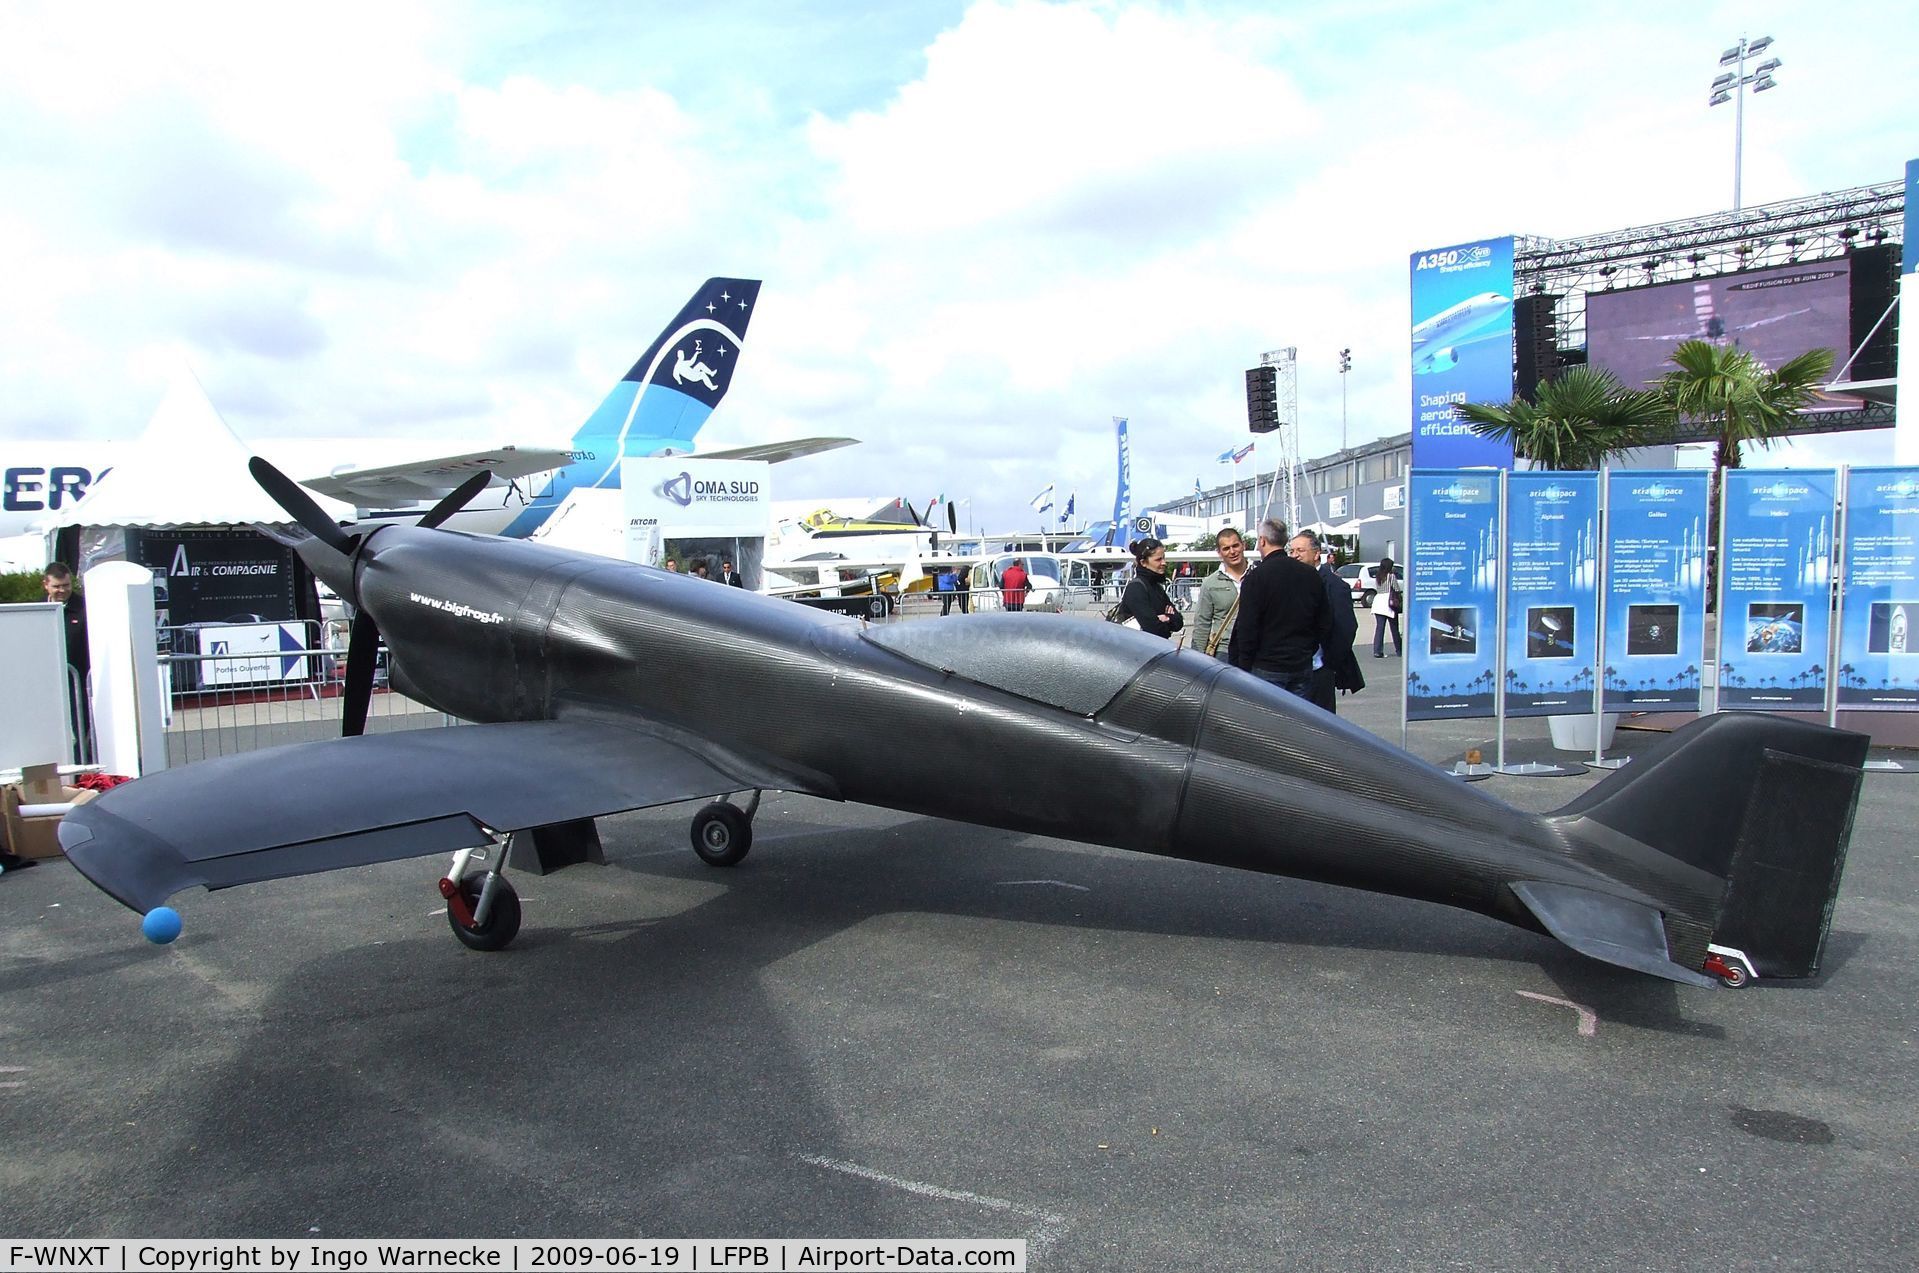 F-WNXT, , Nemesis NXT 'Big Frog' - still unfinished and unmarked - at the Aerosalon 2009, Paris